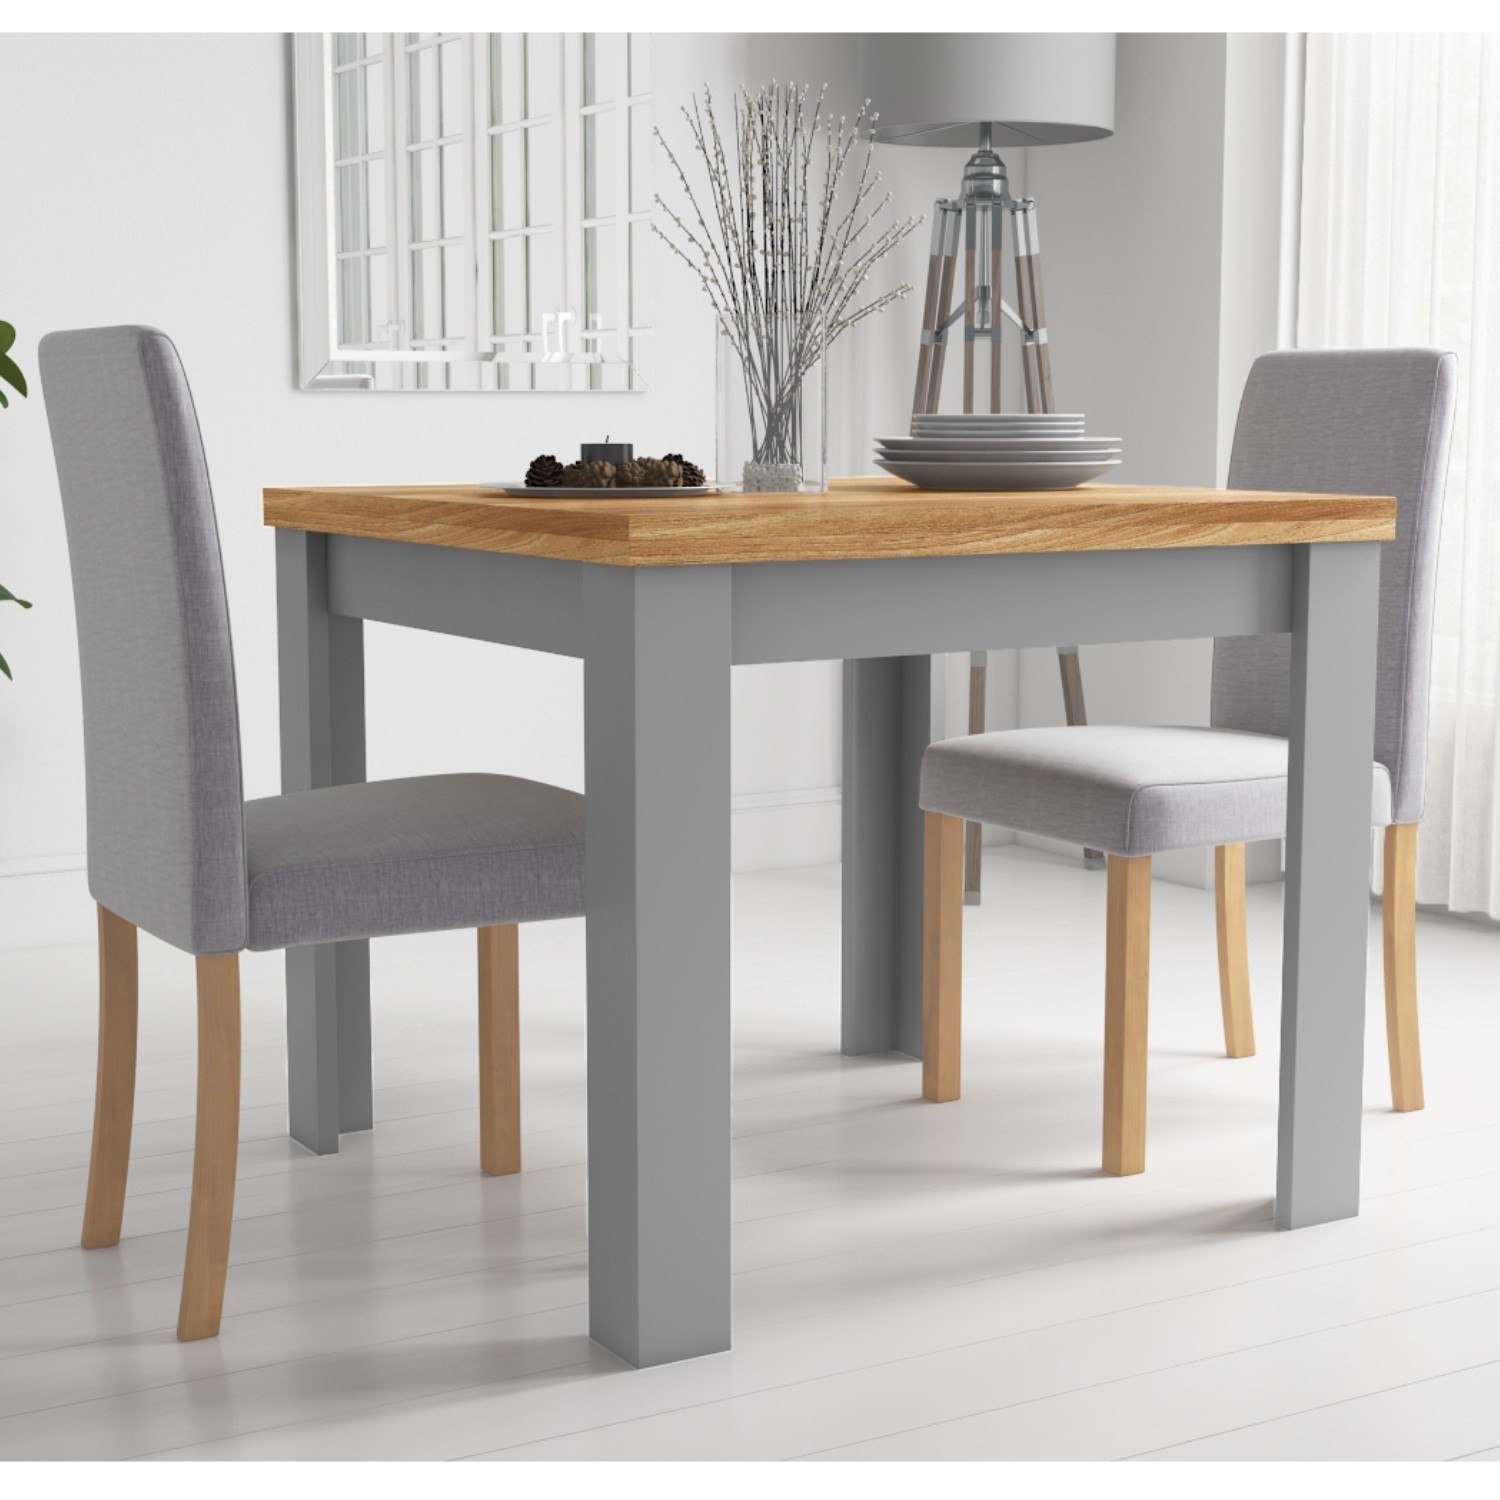 New Town Flip Top Grey Natural Dining Set With 2 Dining Chairs In Grey Fabric 5056096014327 Ebay